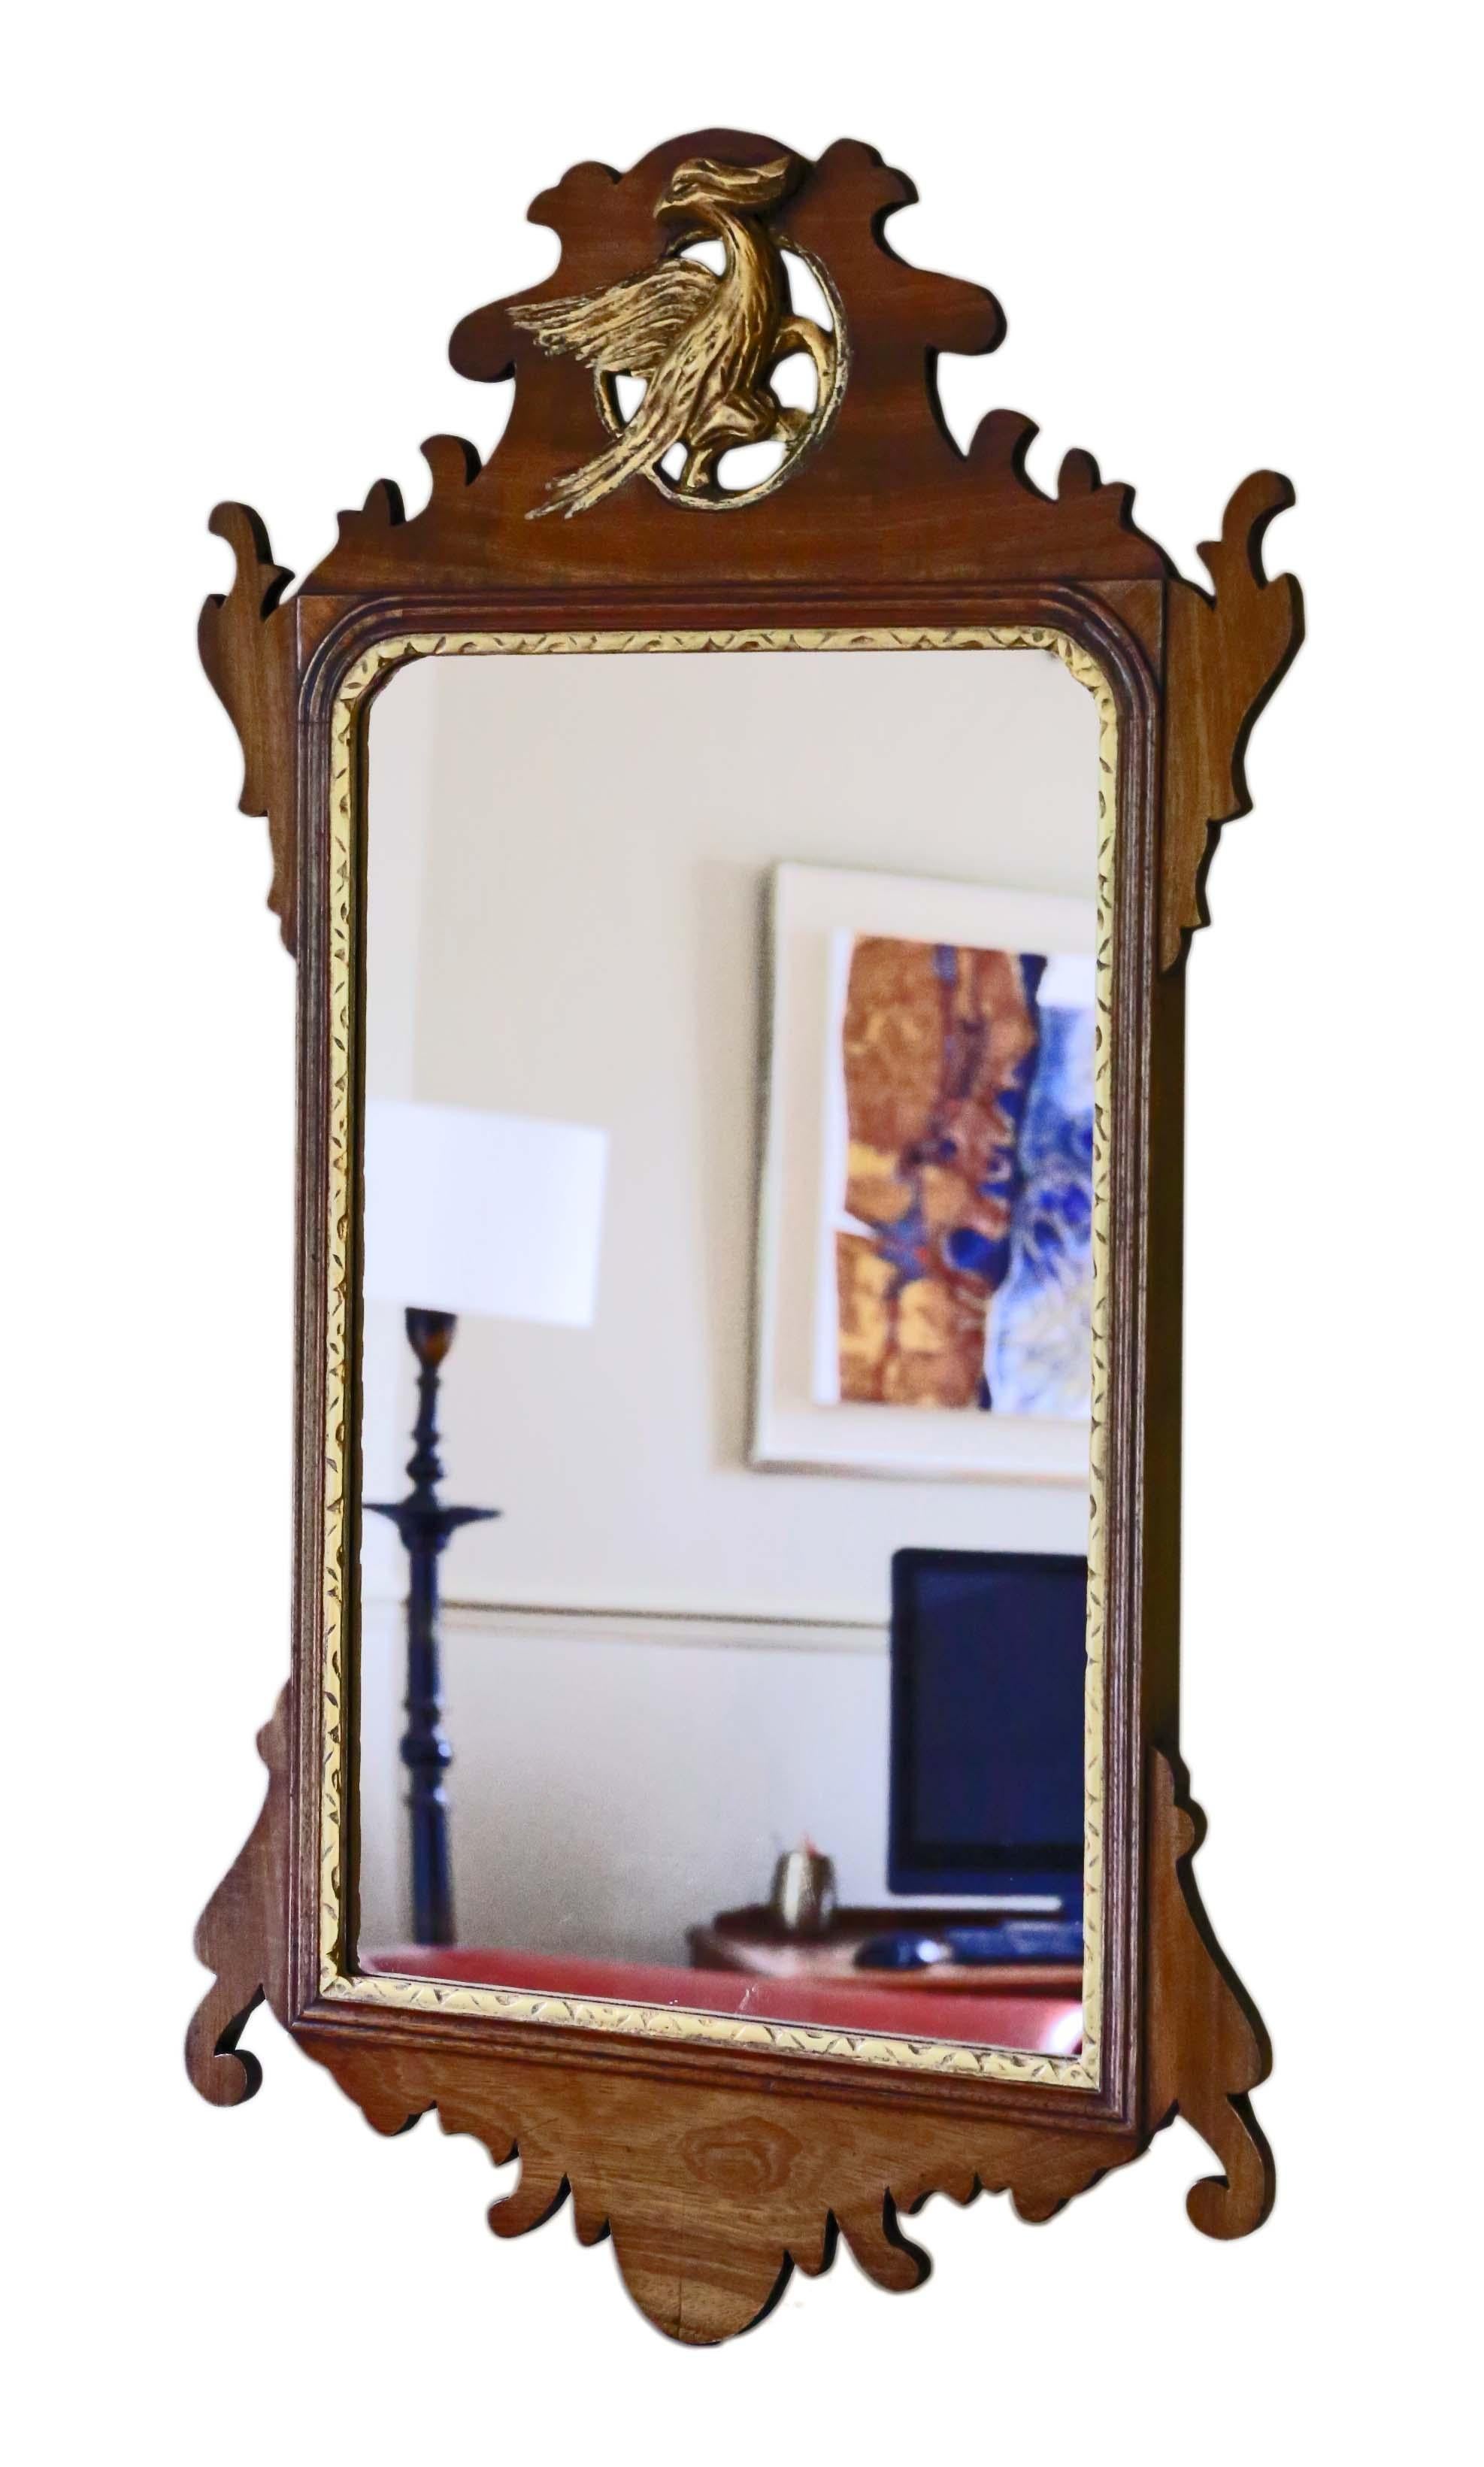 Antique large Georgian revival mahogany and gilt fret cut wall mirror, circa 1900.
This is a lovely quality mirror, that is full of age, charm and character.
Would look amazing in the right location.
The mirrored glass is in good order.
Overall